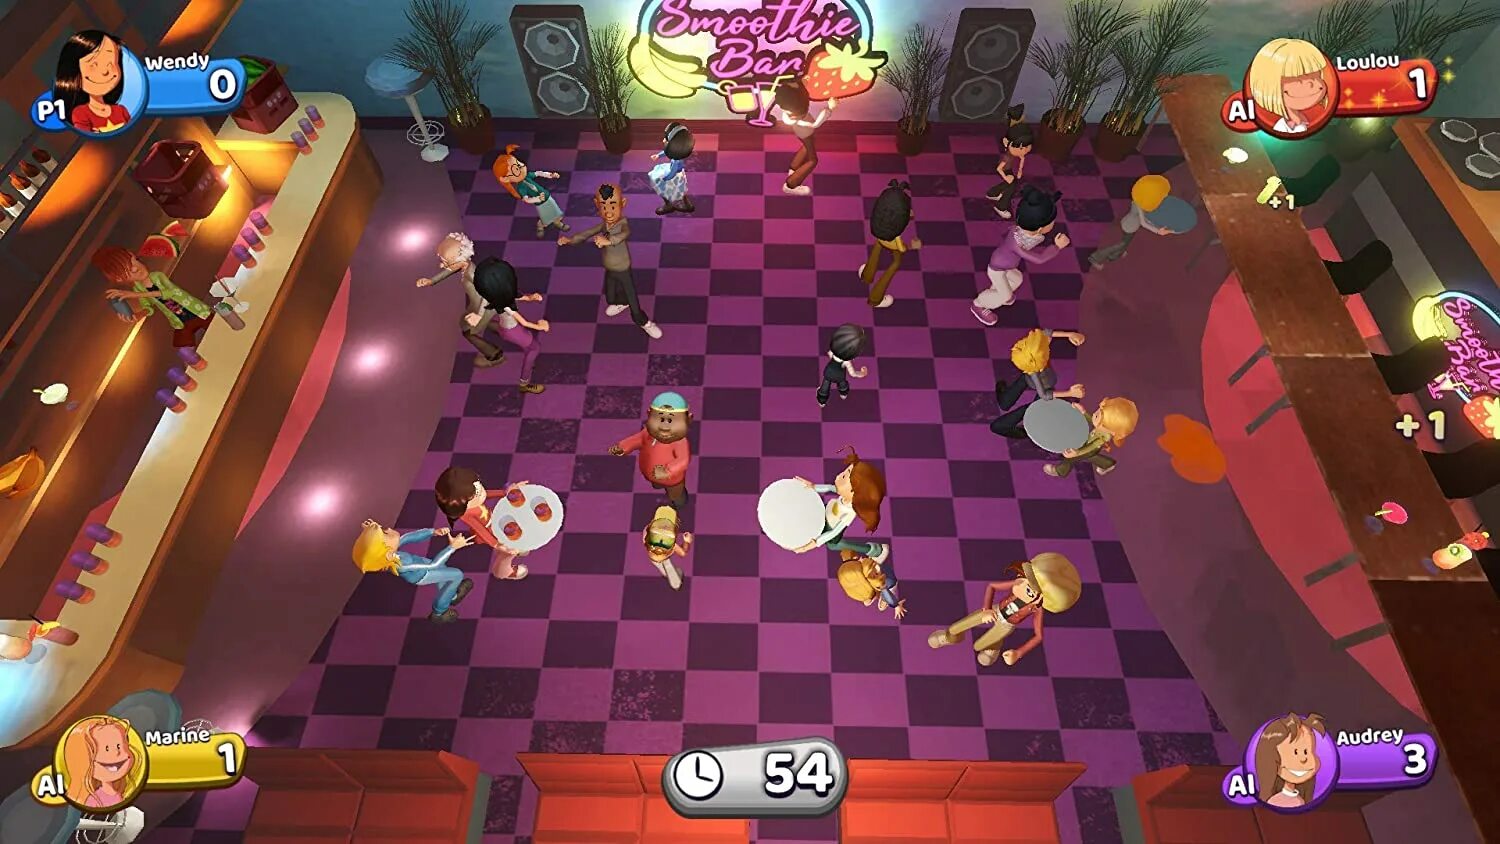 Игра сестры матери. Игра les sisters. Игра sisters in Hotel. The sisters - Party of the year. 23 Sisters game.